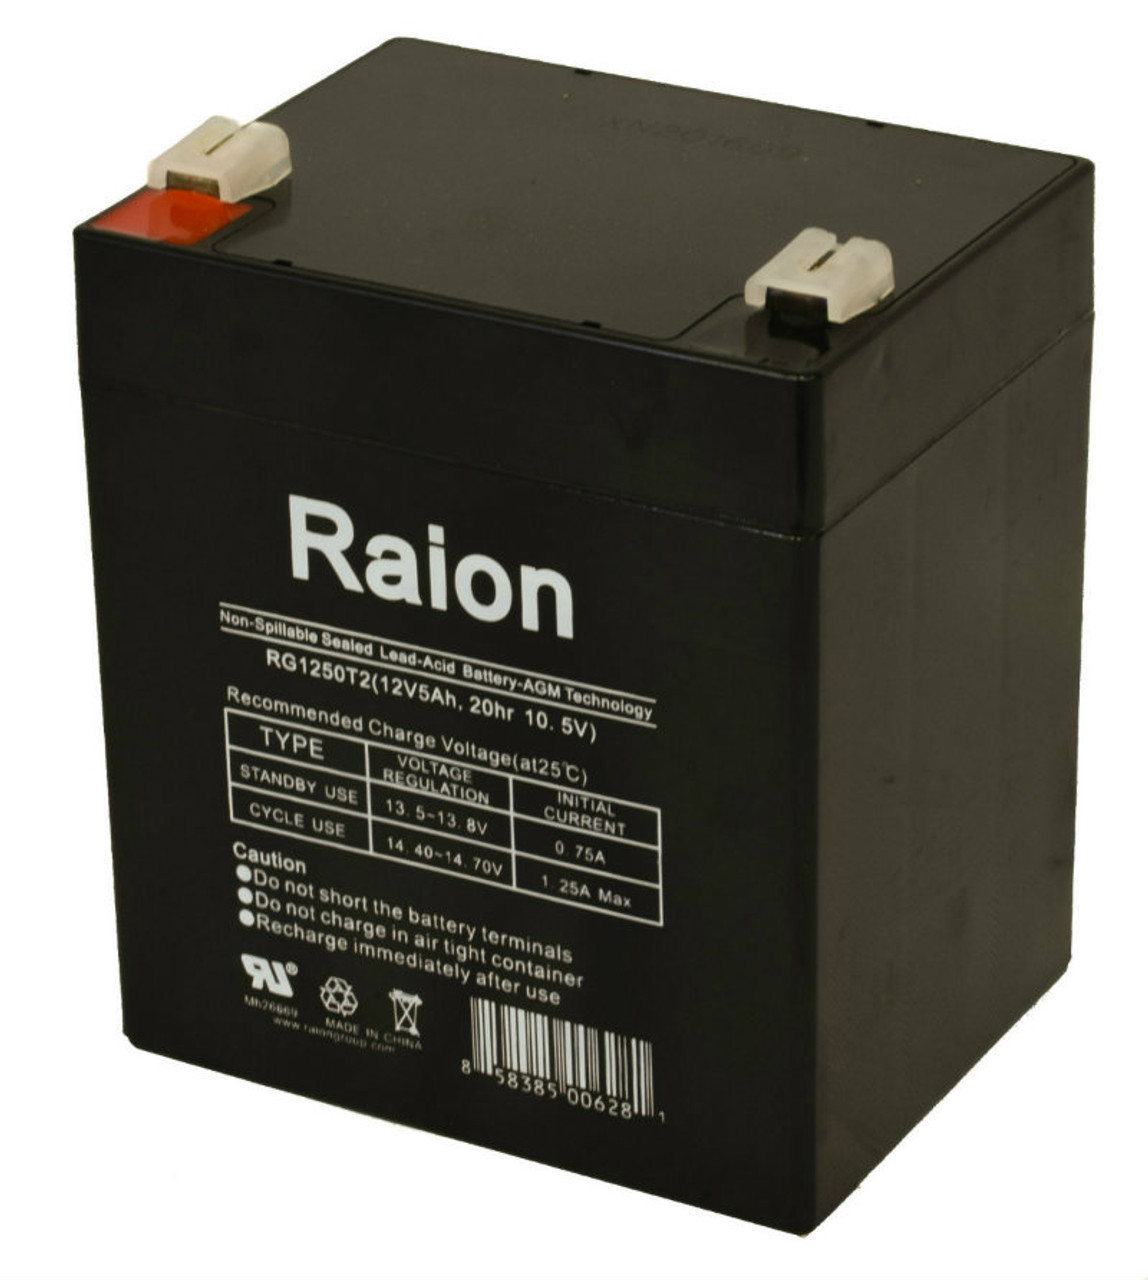 Raion Power RG1250T1 Replacement Alarm Security System Battery for Ademco Vista 128B